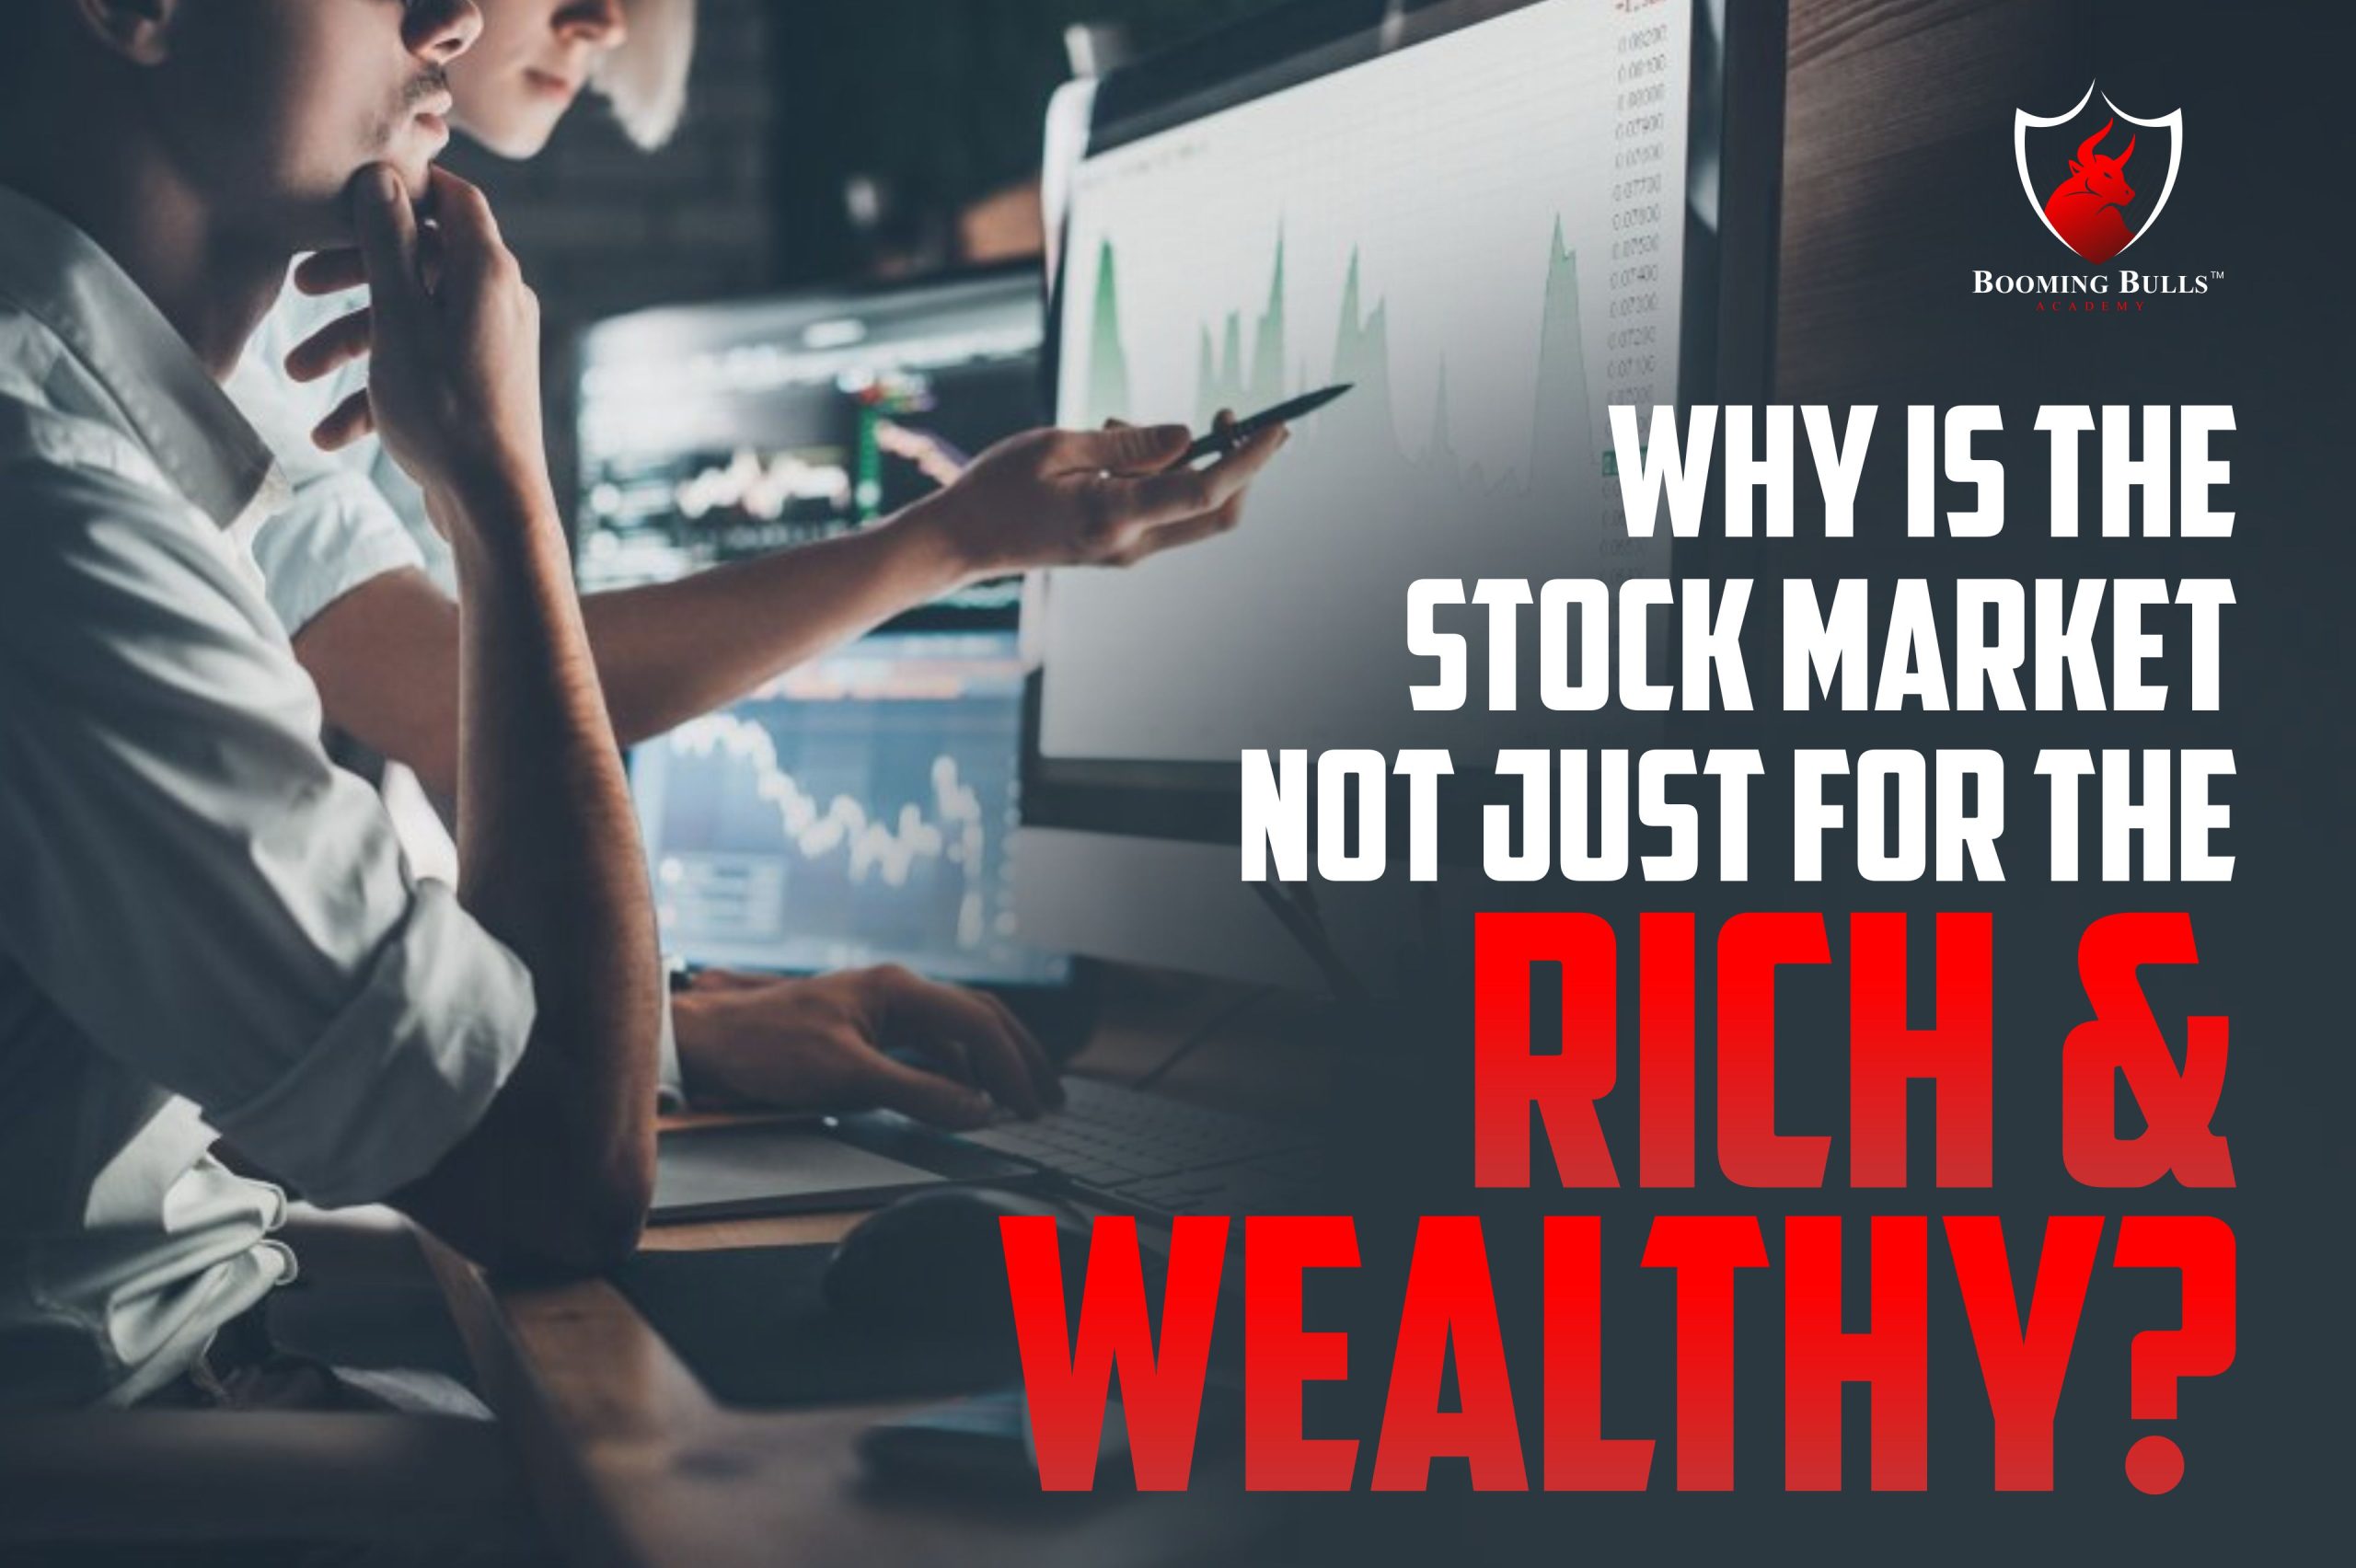 Why Is The Stock Market Not Just For The Rich & Wealthy?